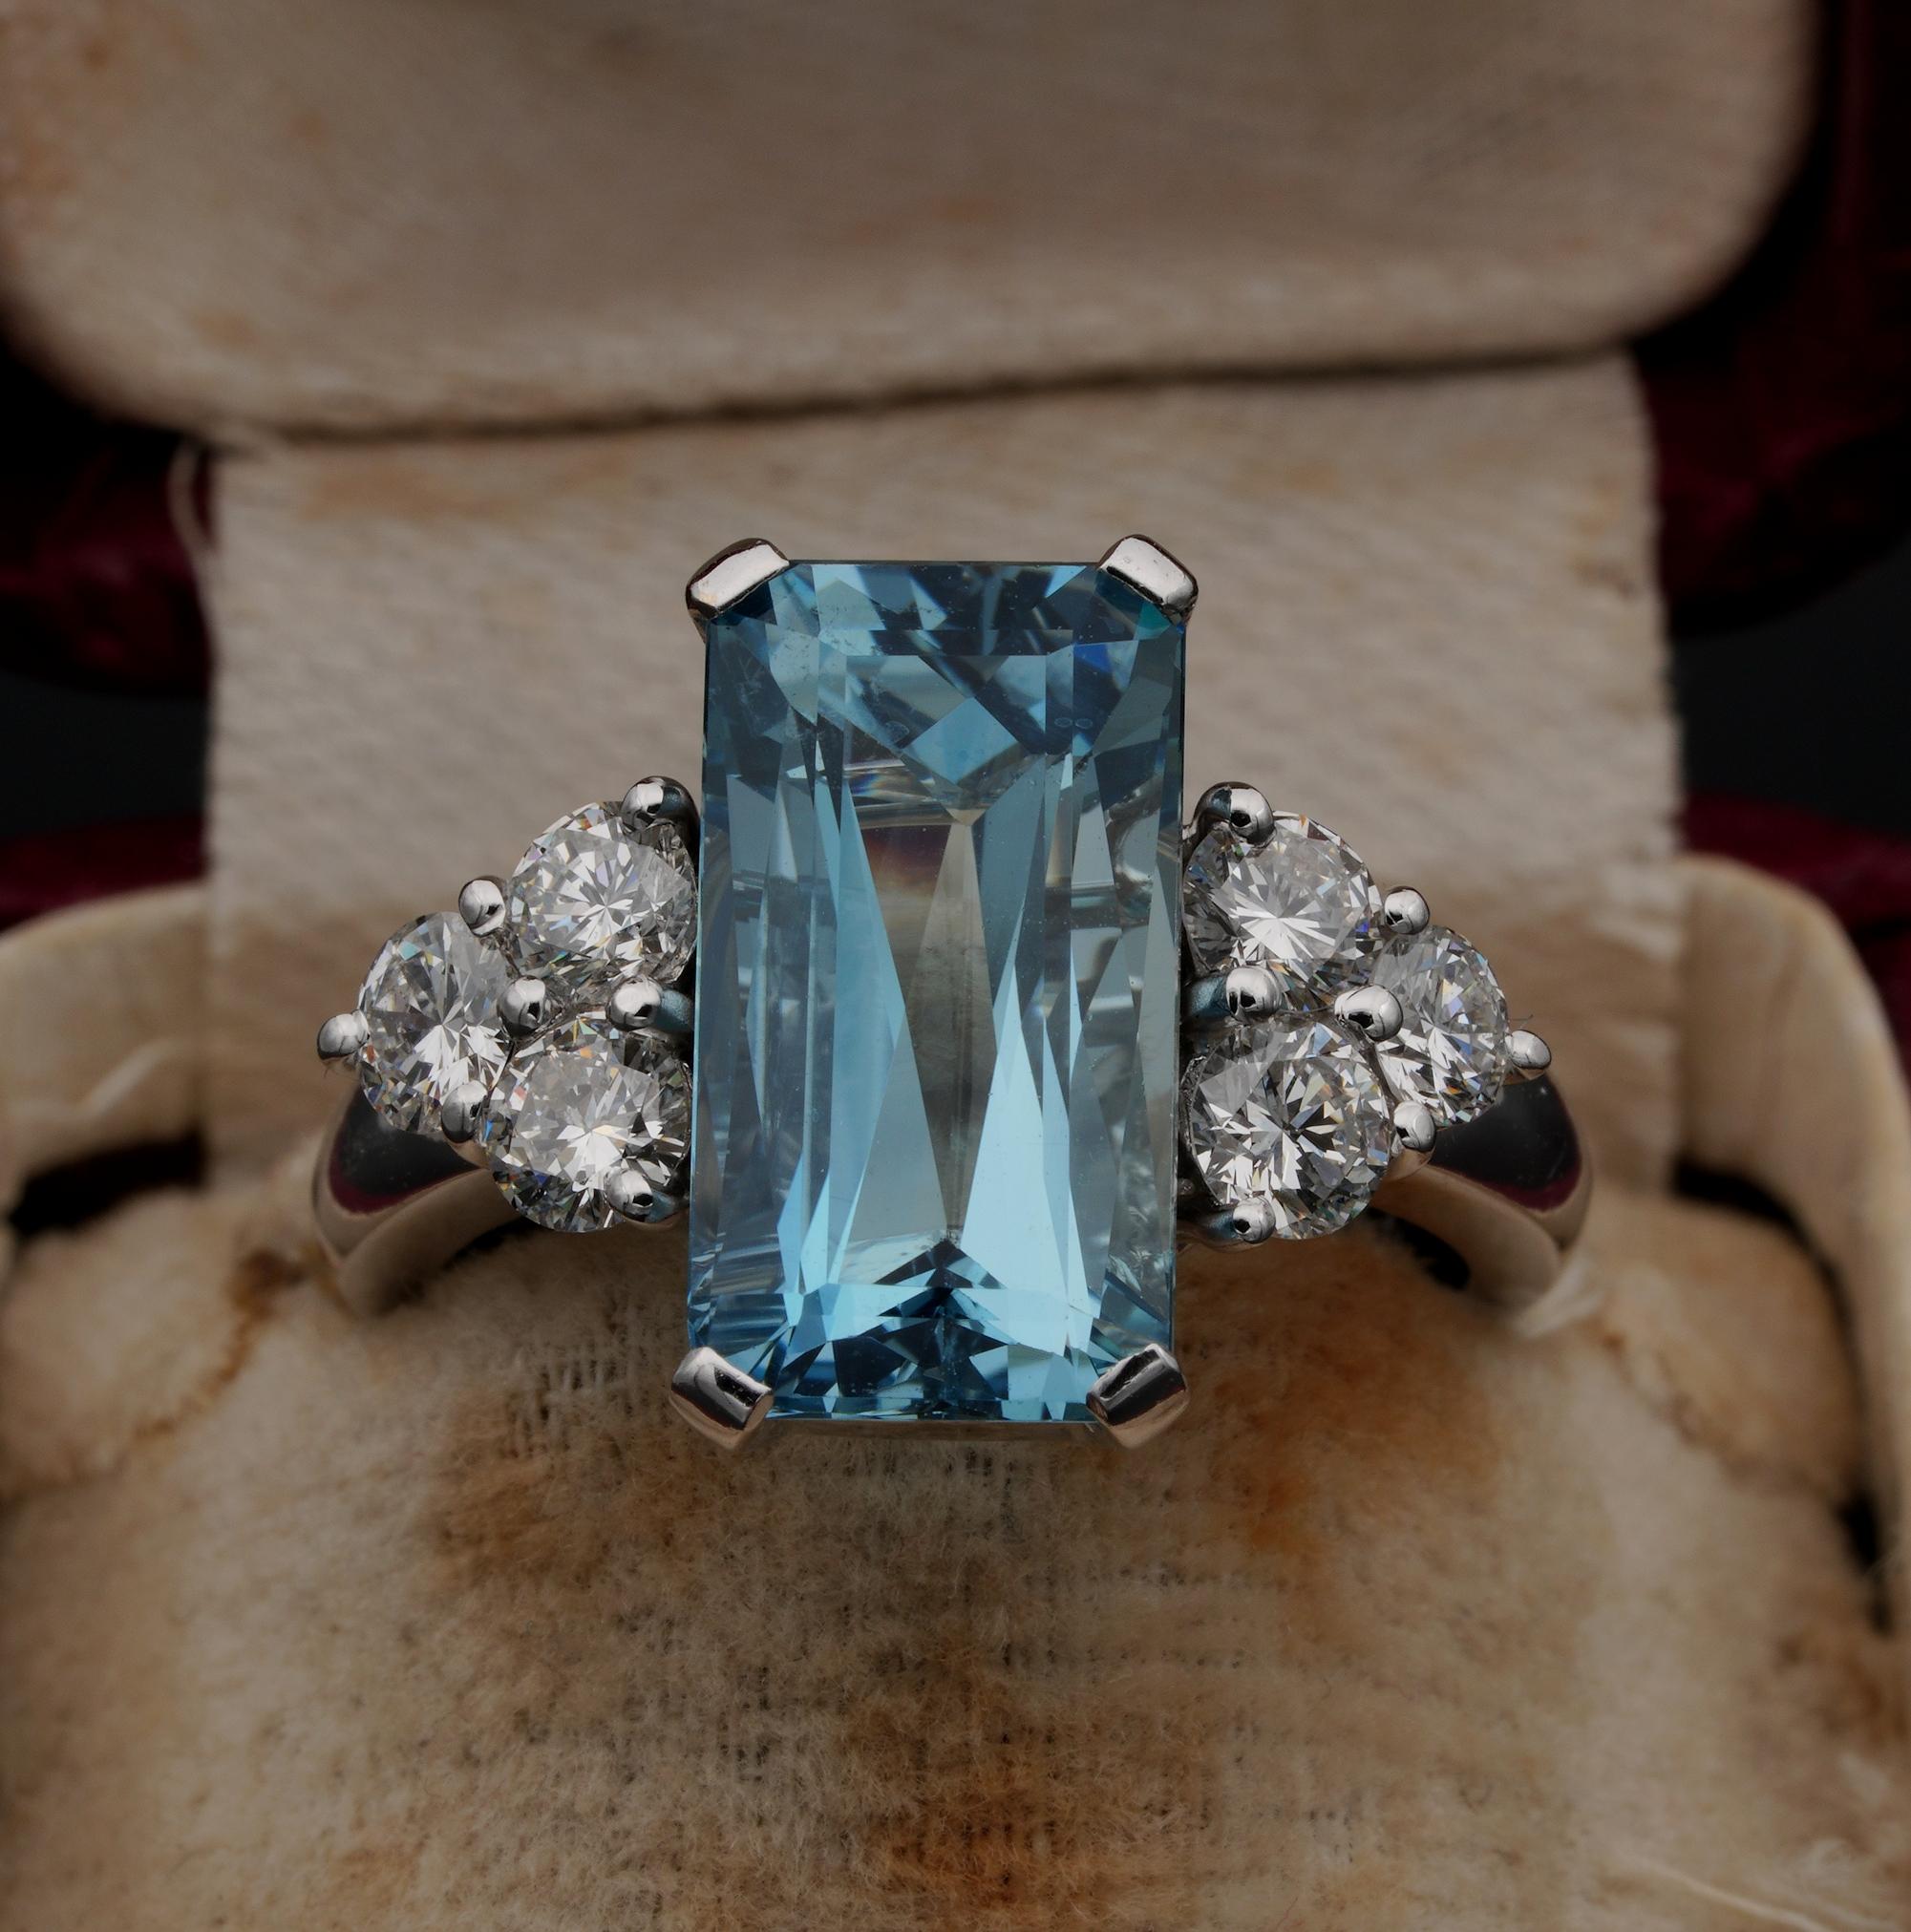 Sensual Aquamarine

Aquamarine is one of the preferred gemstones for engagements
In ancient lore, Aquamarine was believed to be the treasure of mermaids, and was used by sailors as a talisman of good luck, fearlessness and protection. It was also